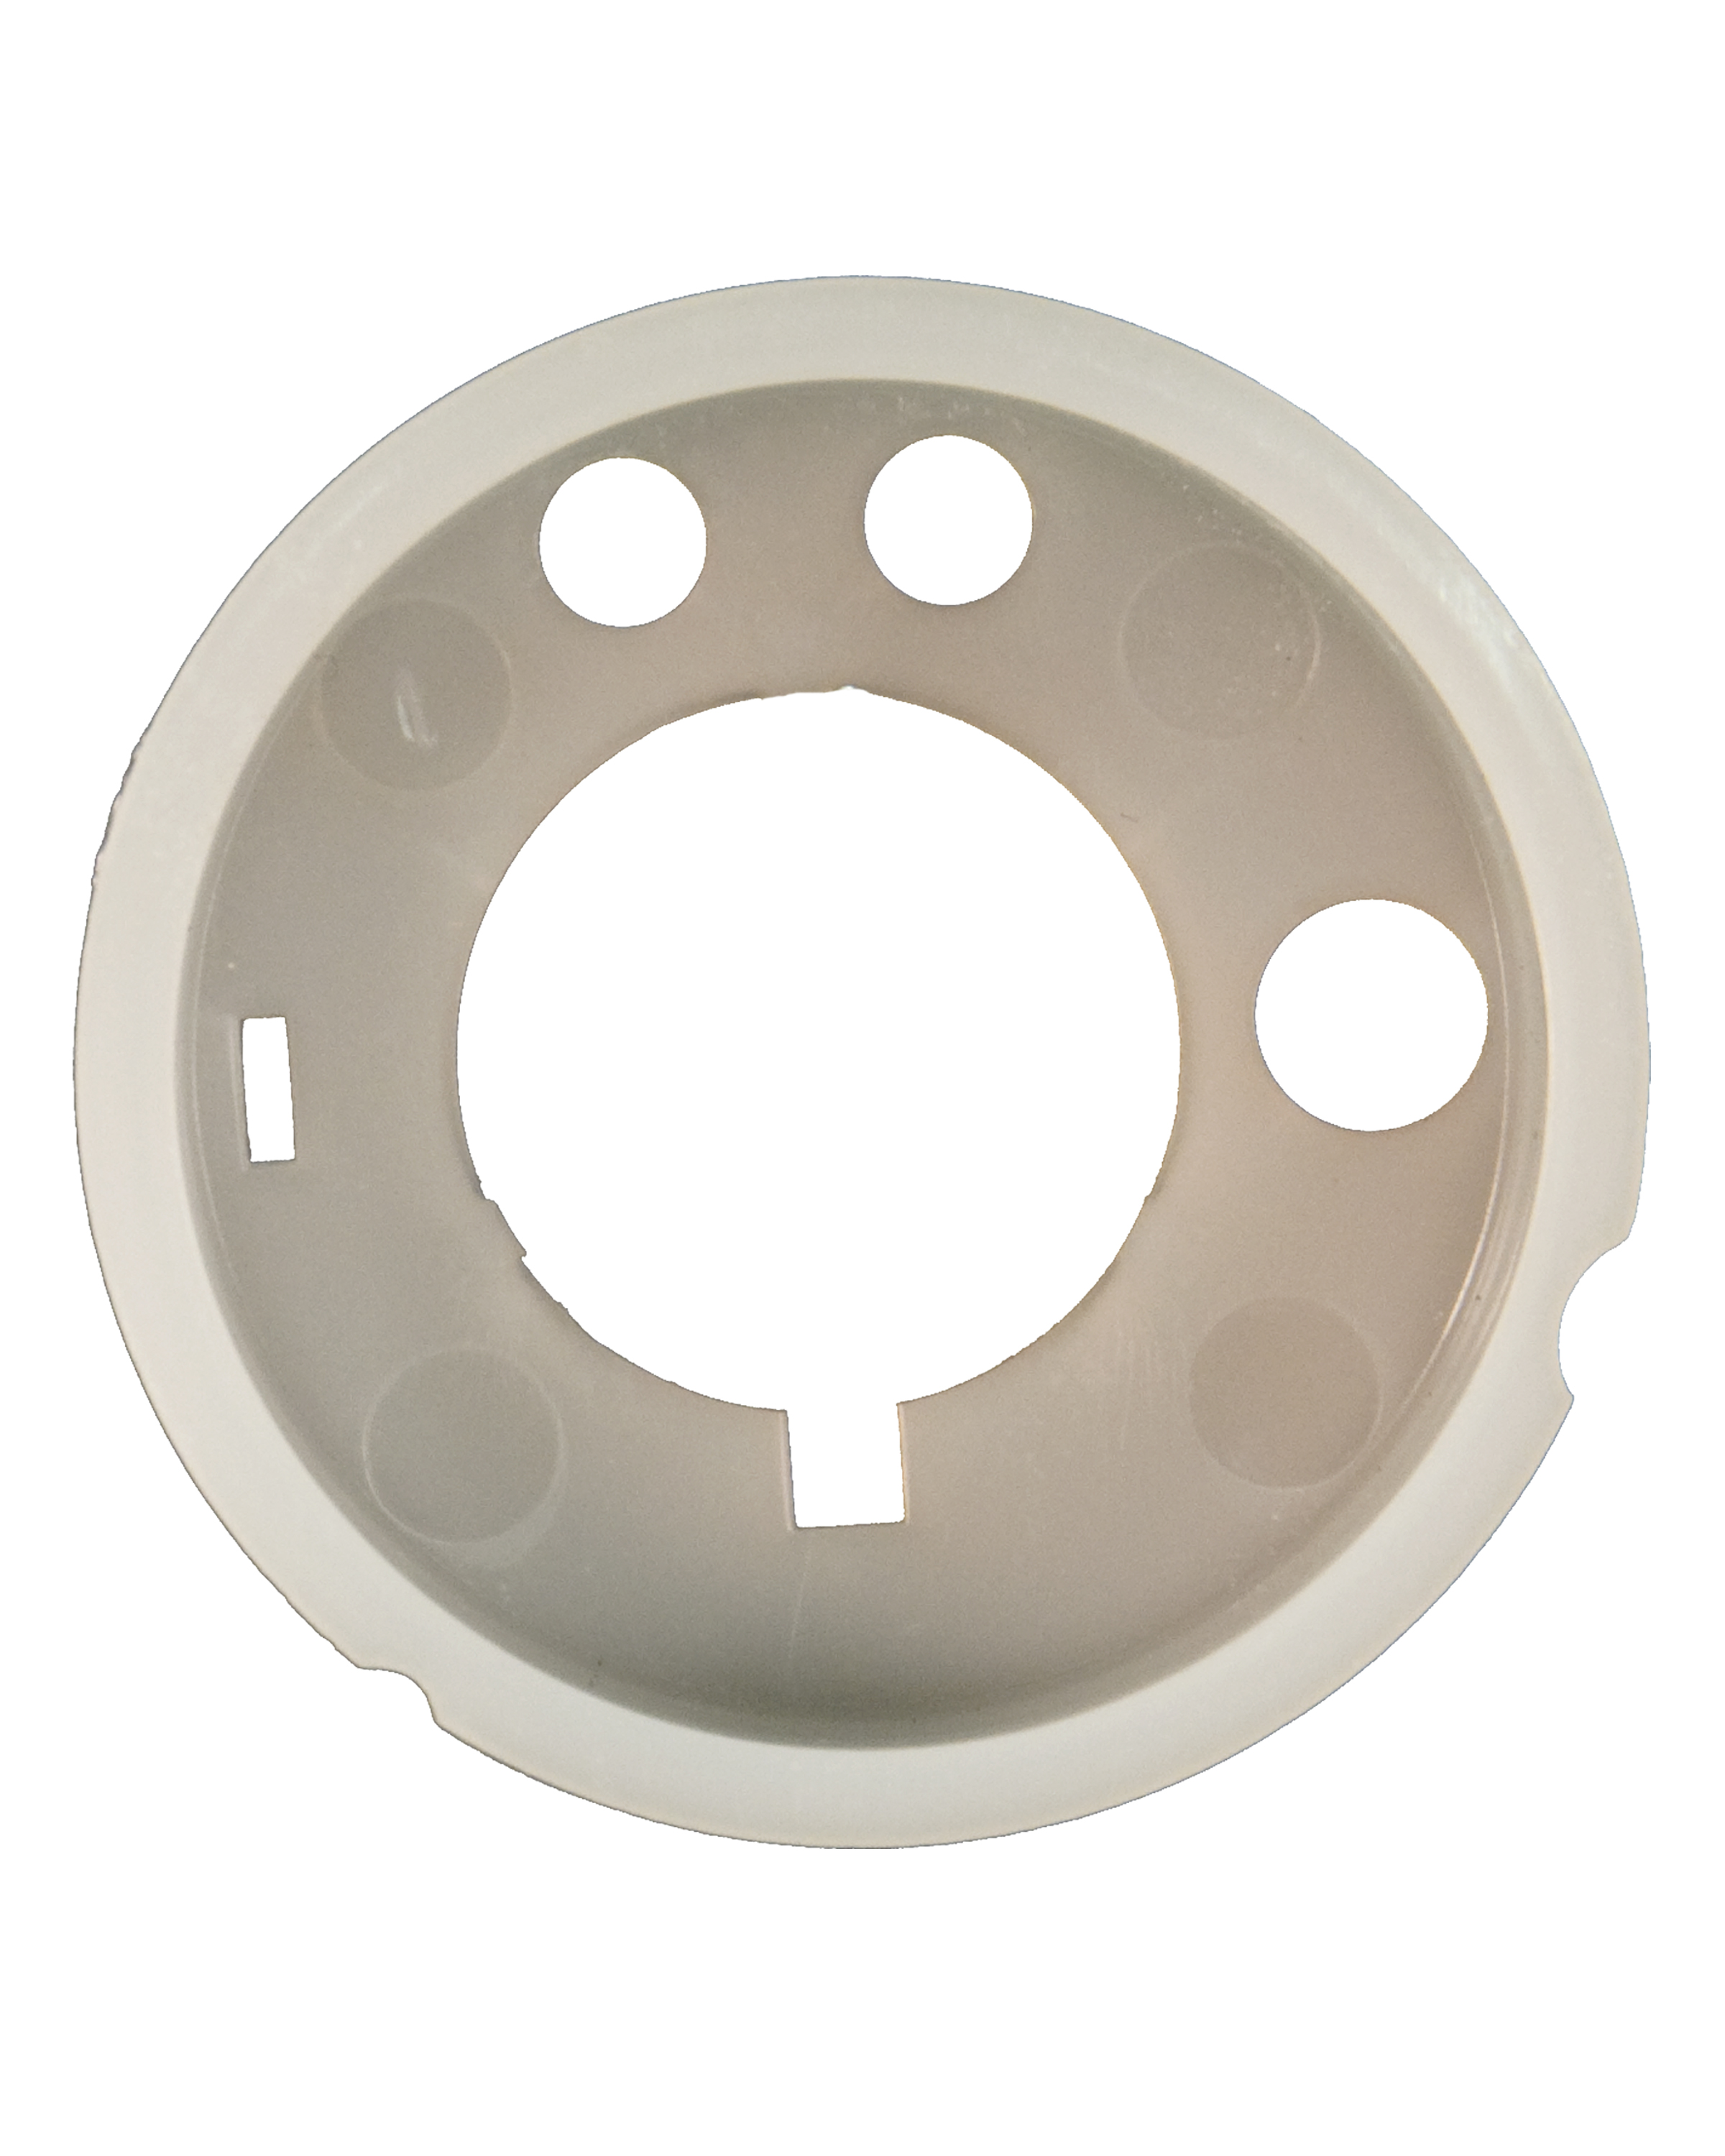 Oil Seal Protector